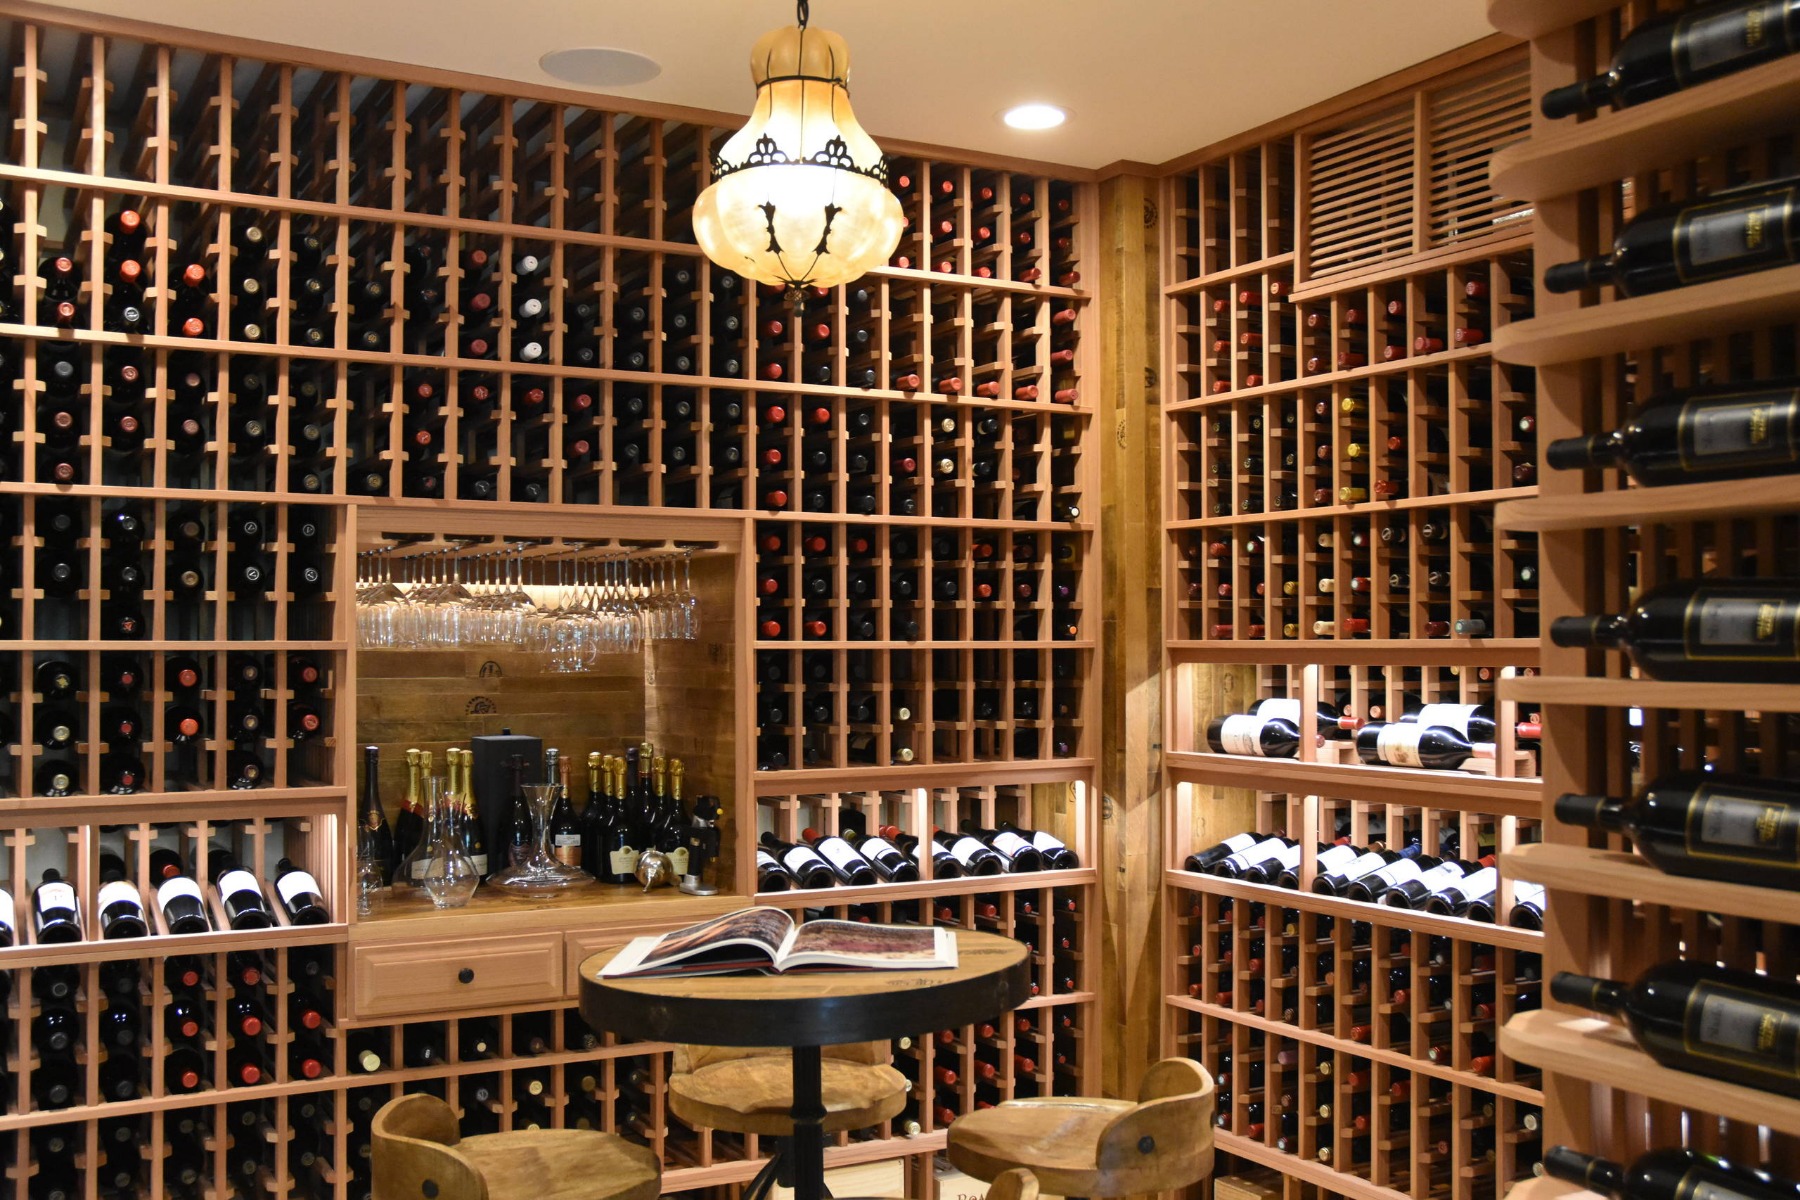 Gorgeous custom wine cellar acts as a dramatic entry piece as you walk into this beautiful home